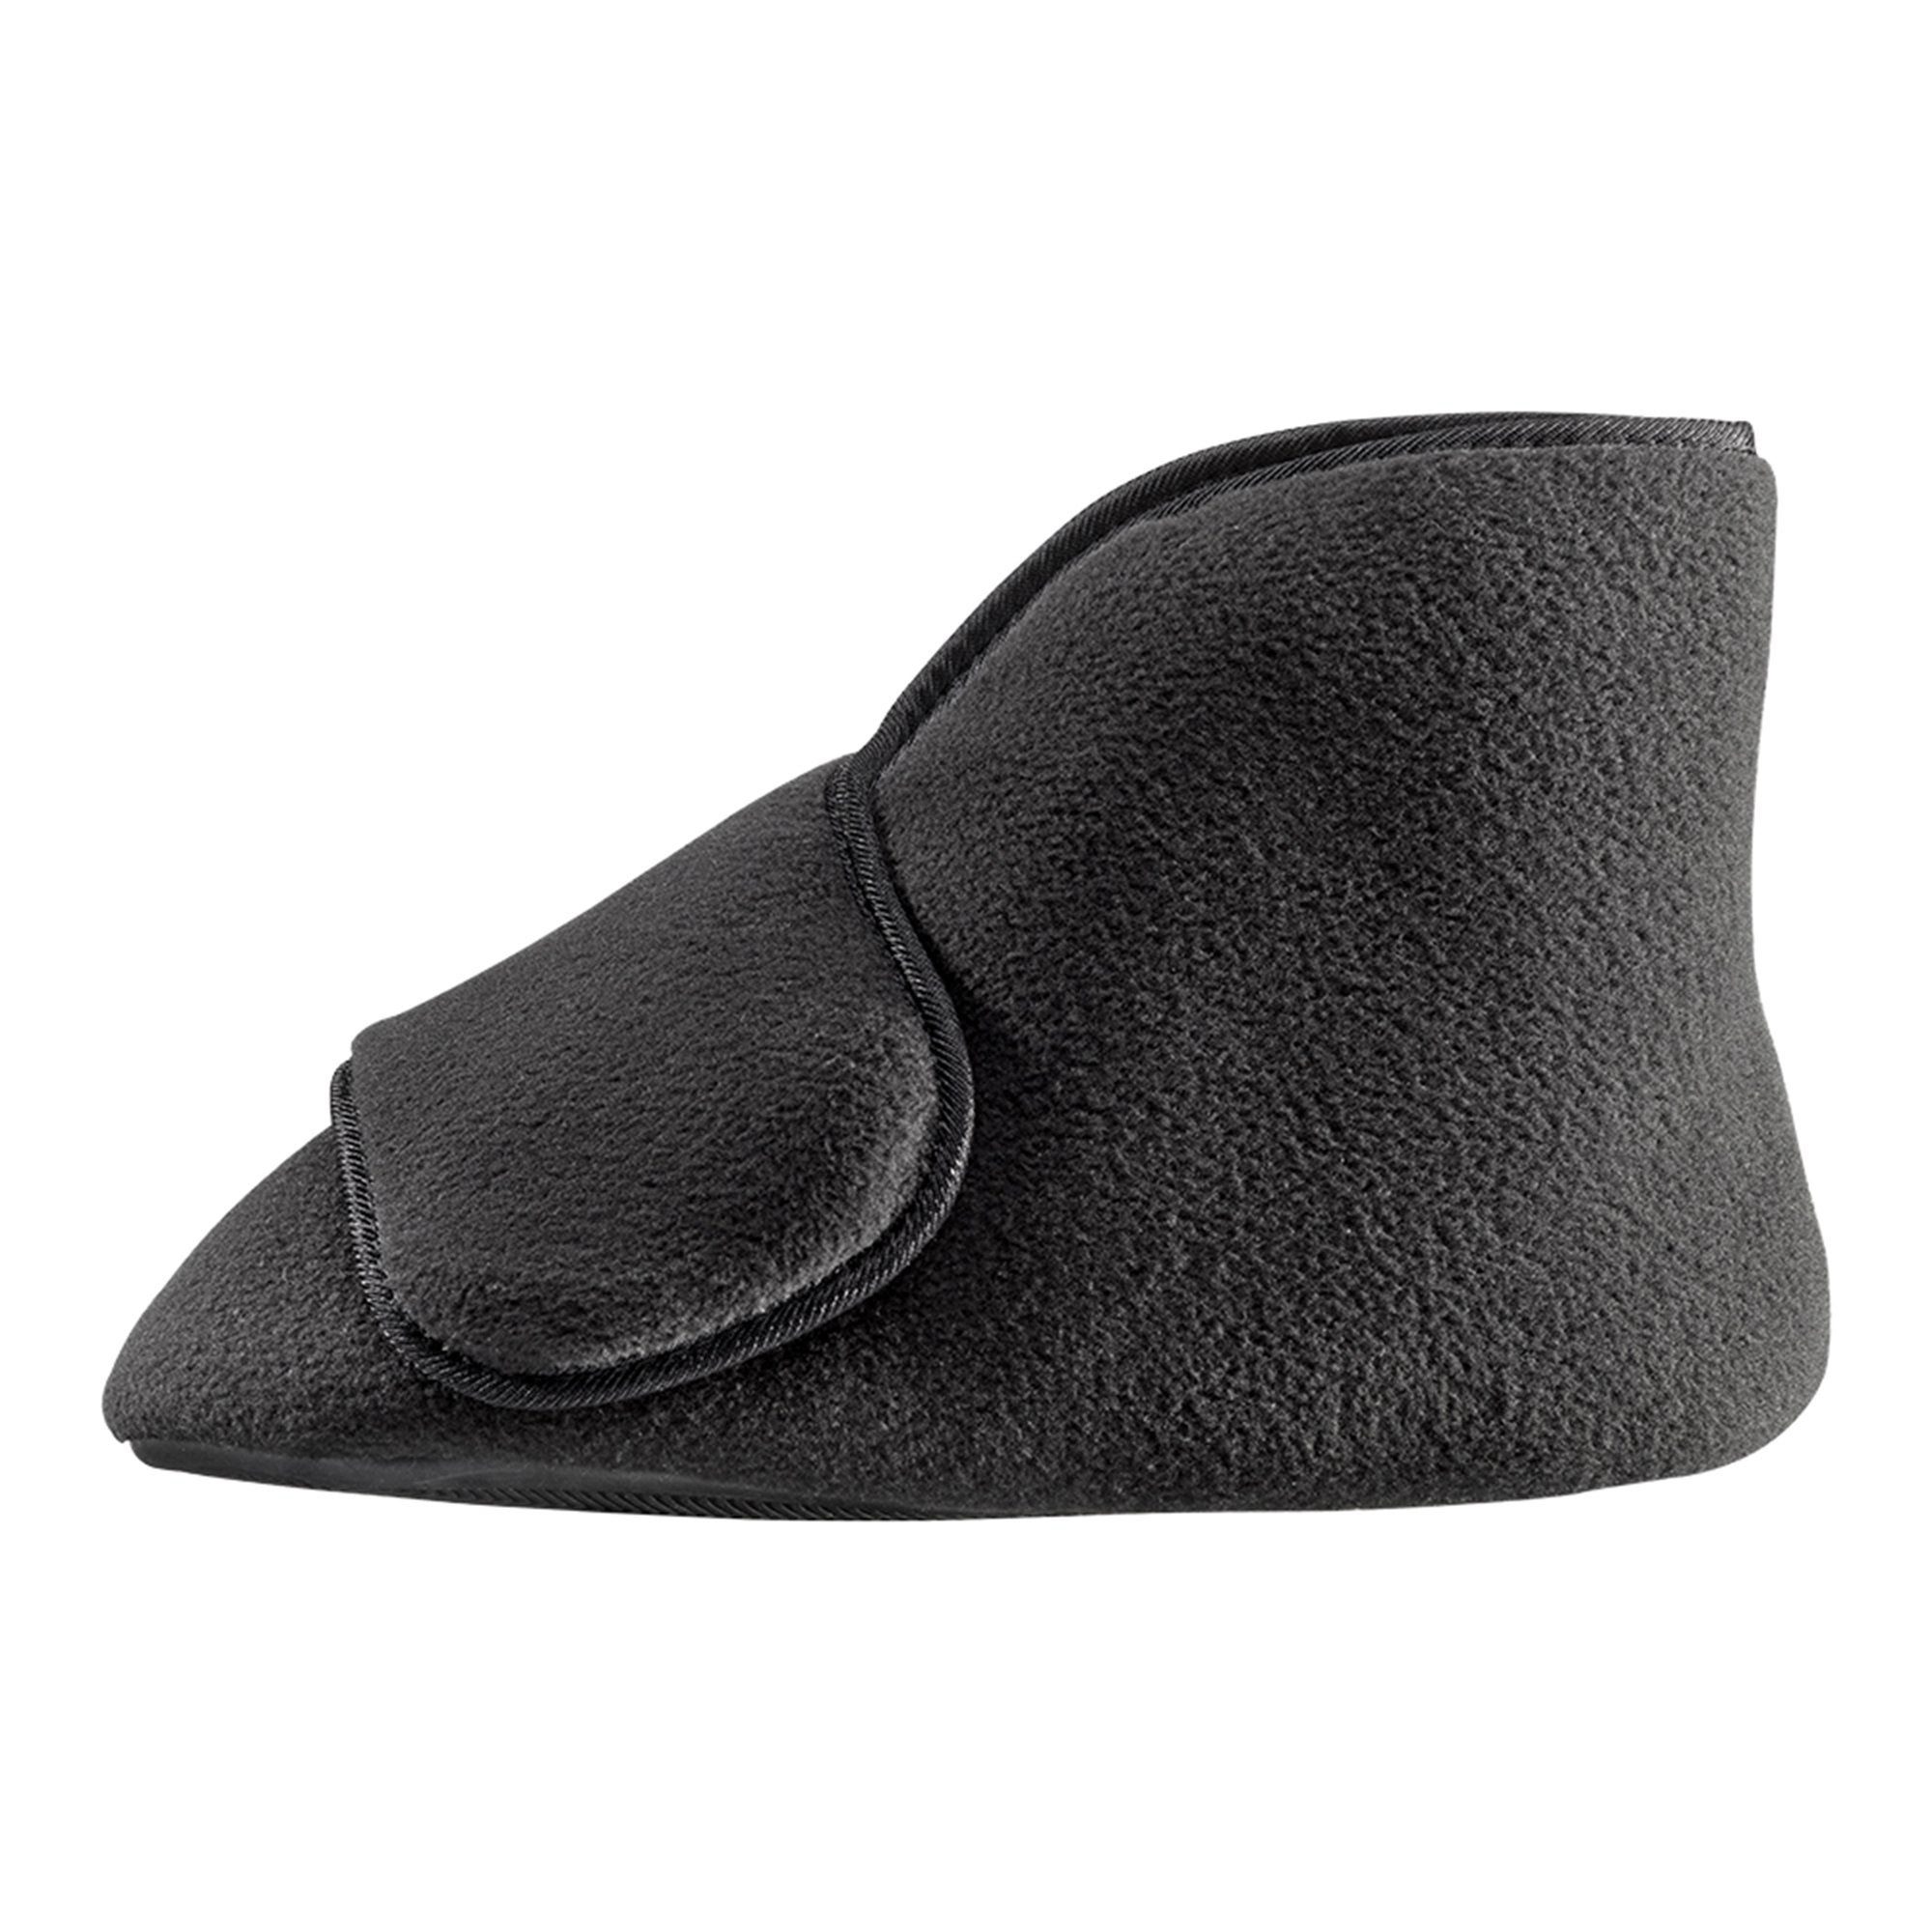 Diabetic Bootie Slippers Silverts Large / X-Wide Black Ankle High